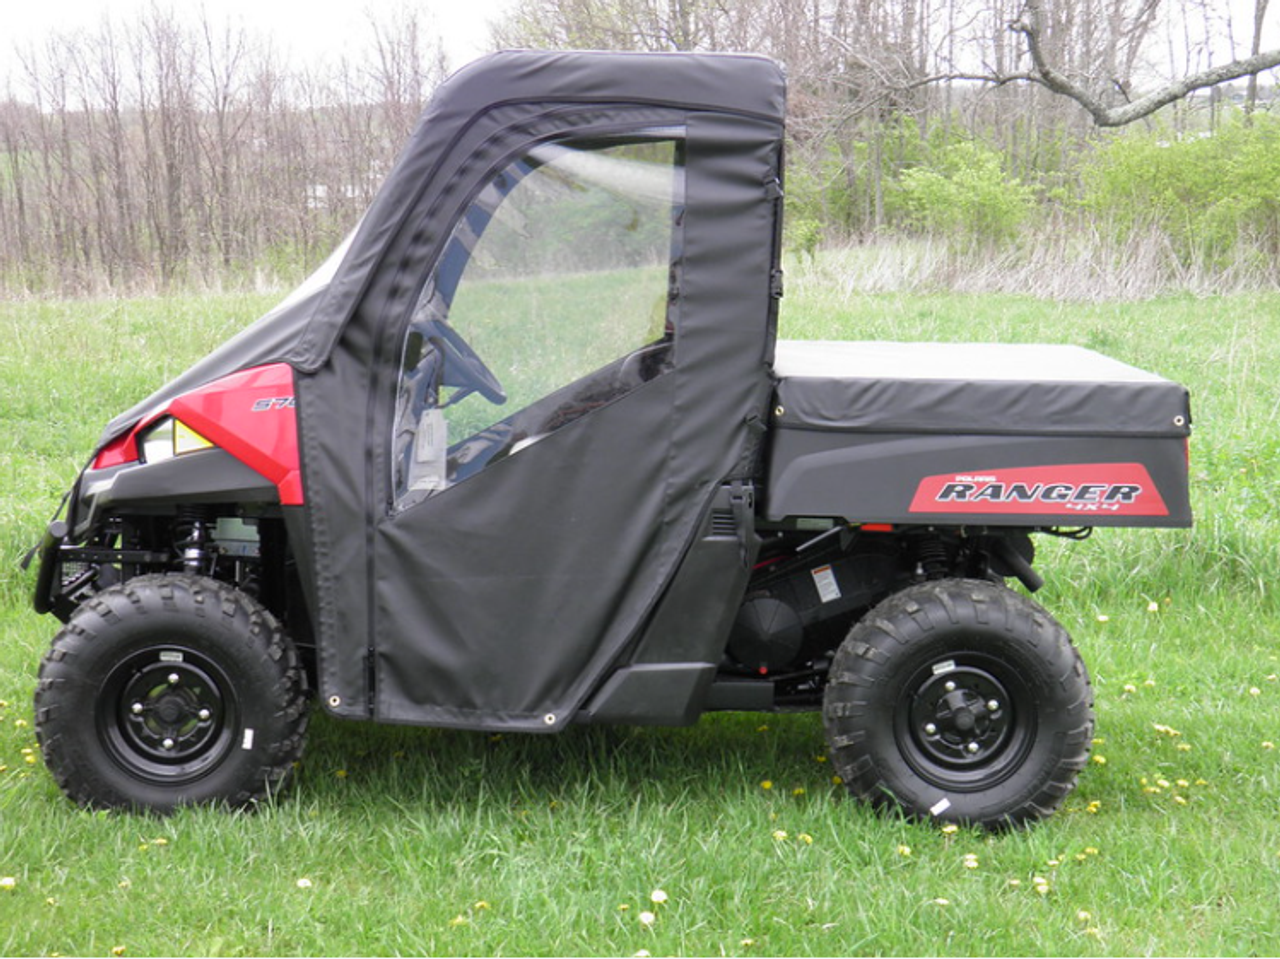 3 Star side x side Polaris Ranger Mid-Size 570 full cab enclosure side view